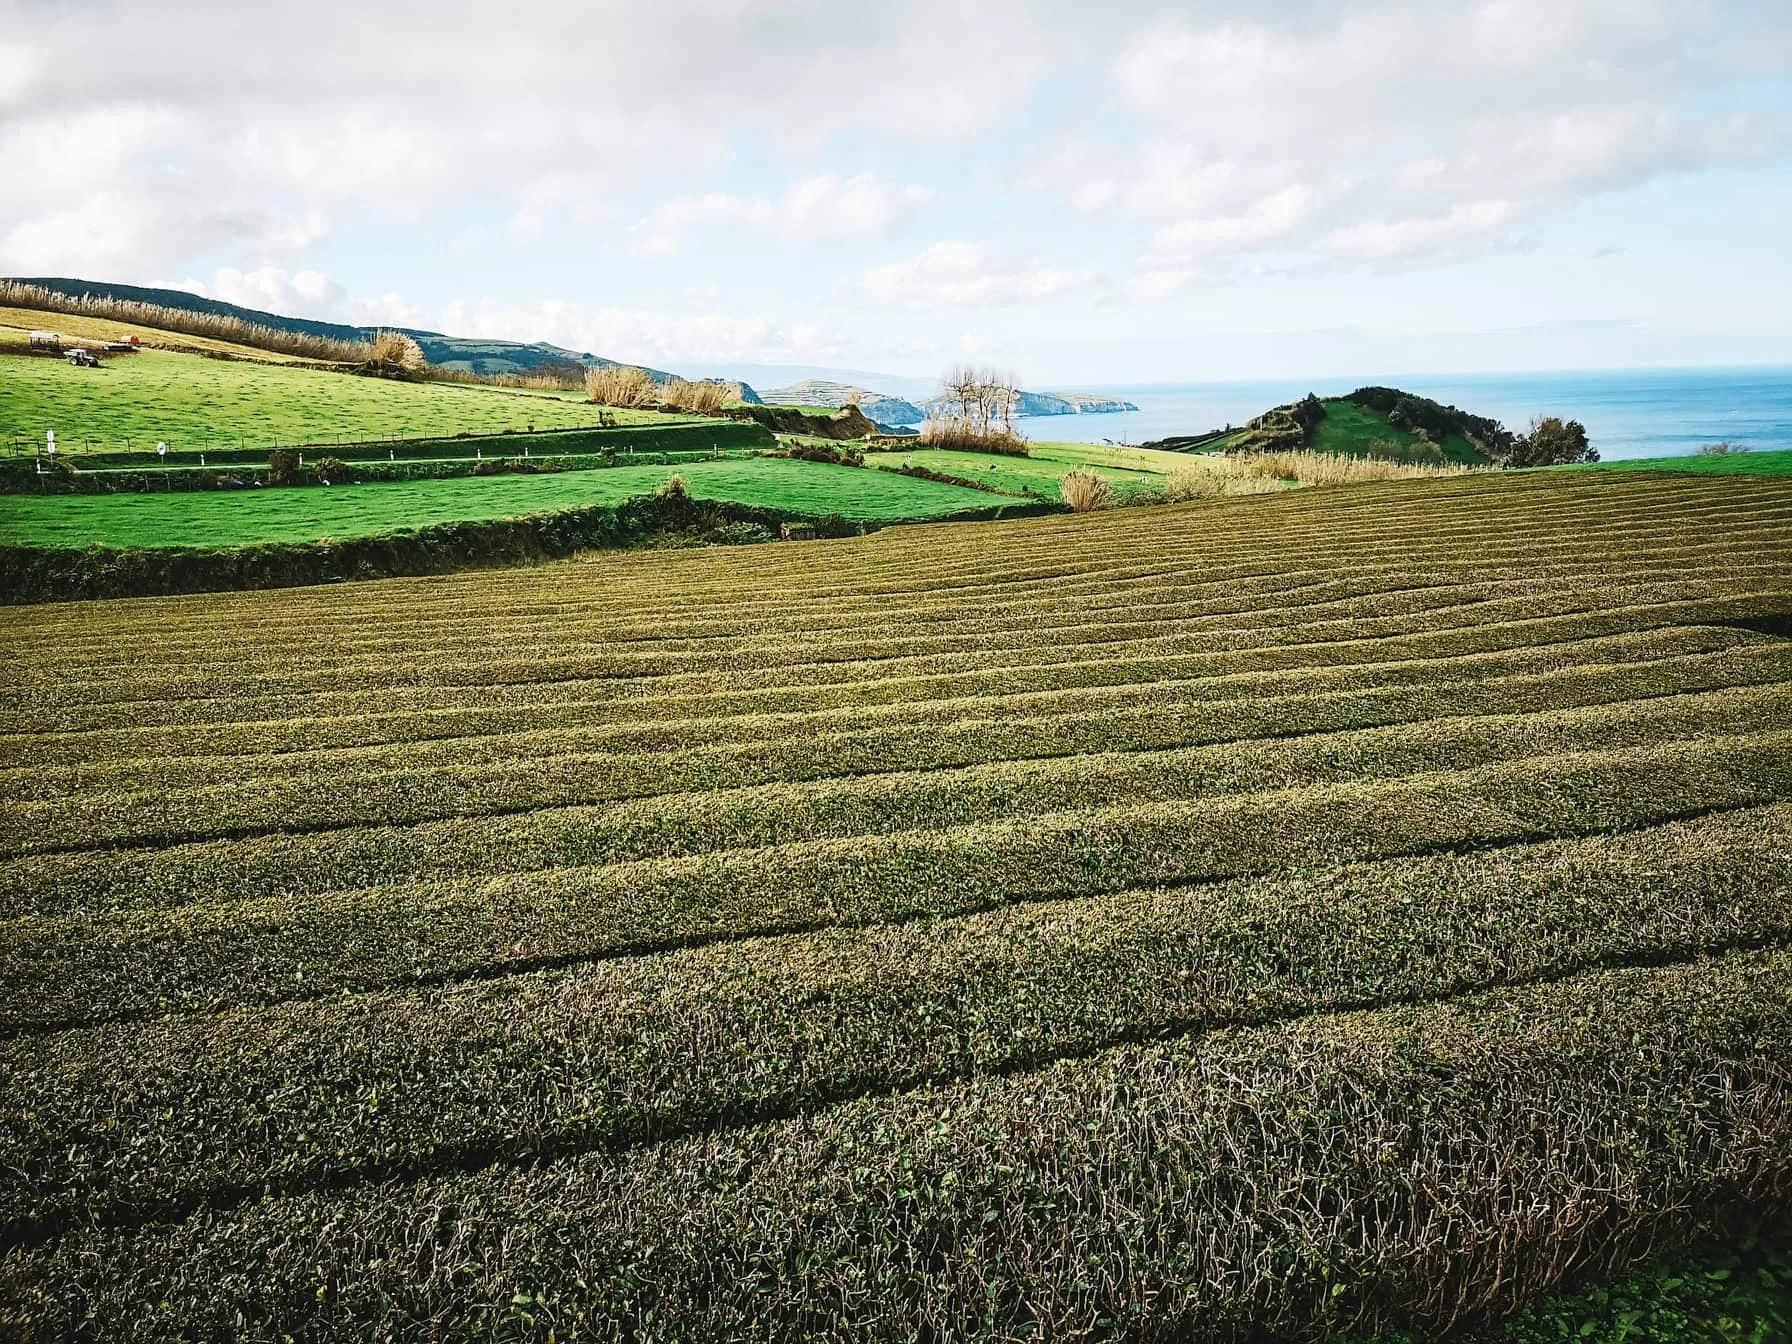 20 Unmissable Things To Do On São Miguel Island, Azores - Sao Miguel Tea Plantation